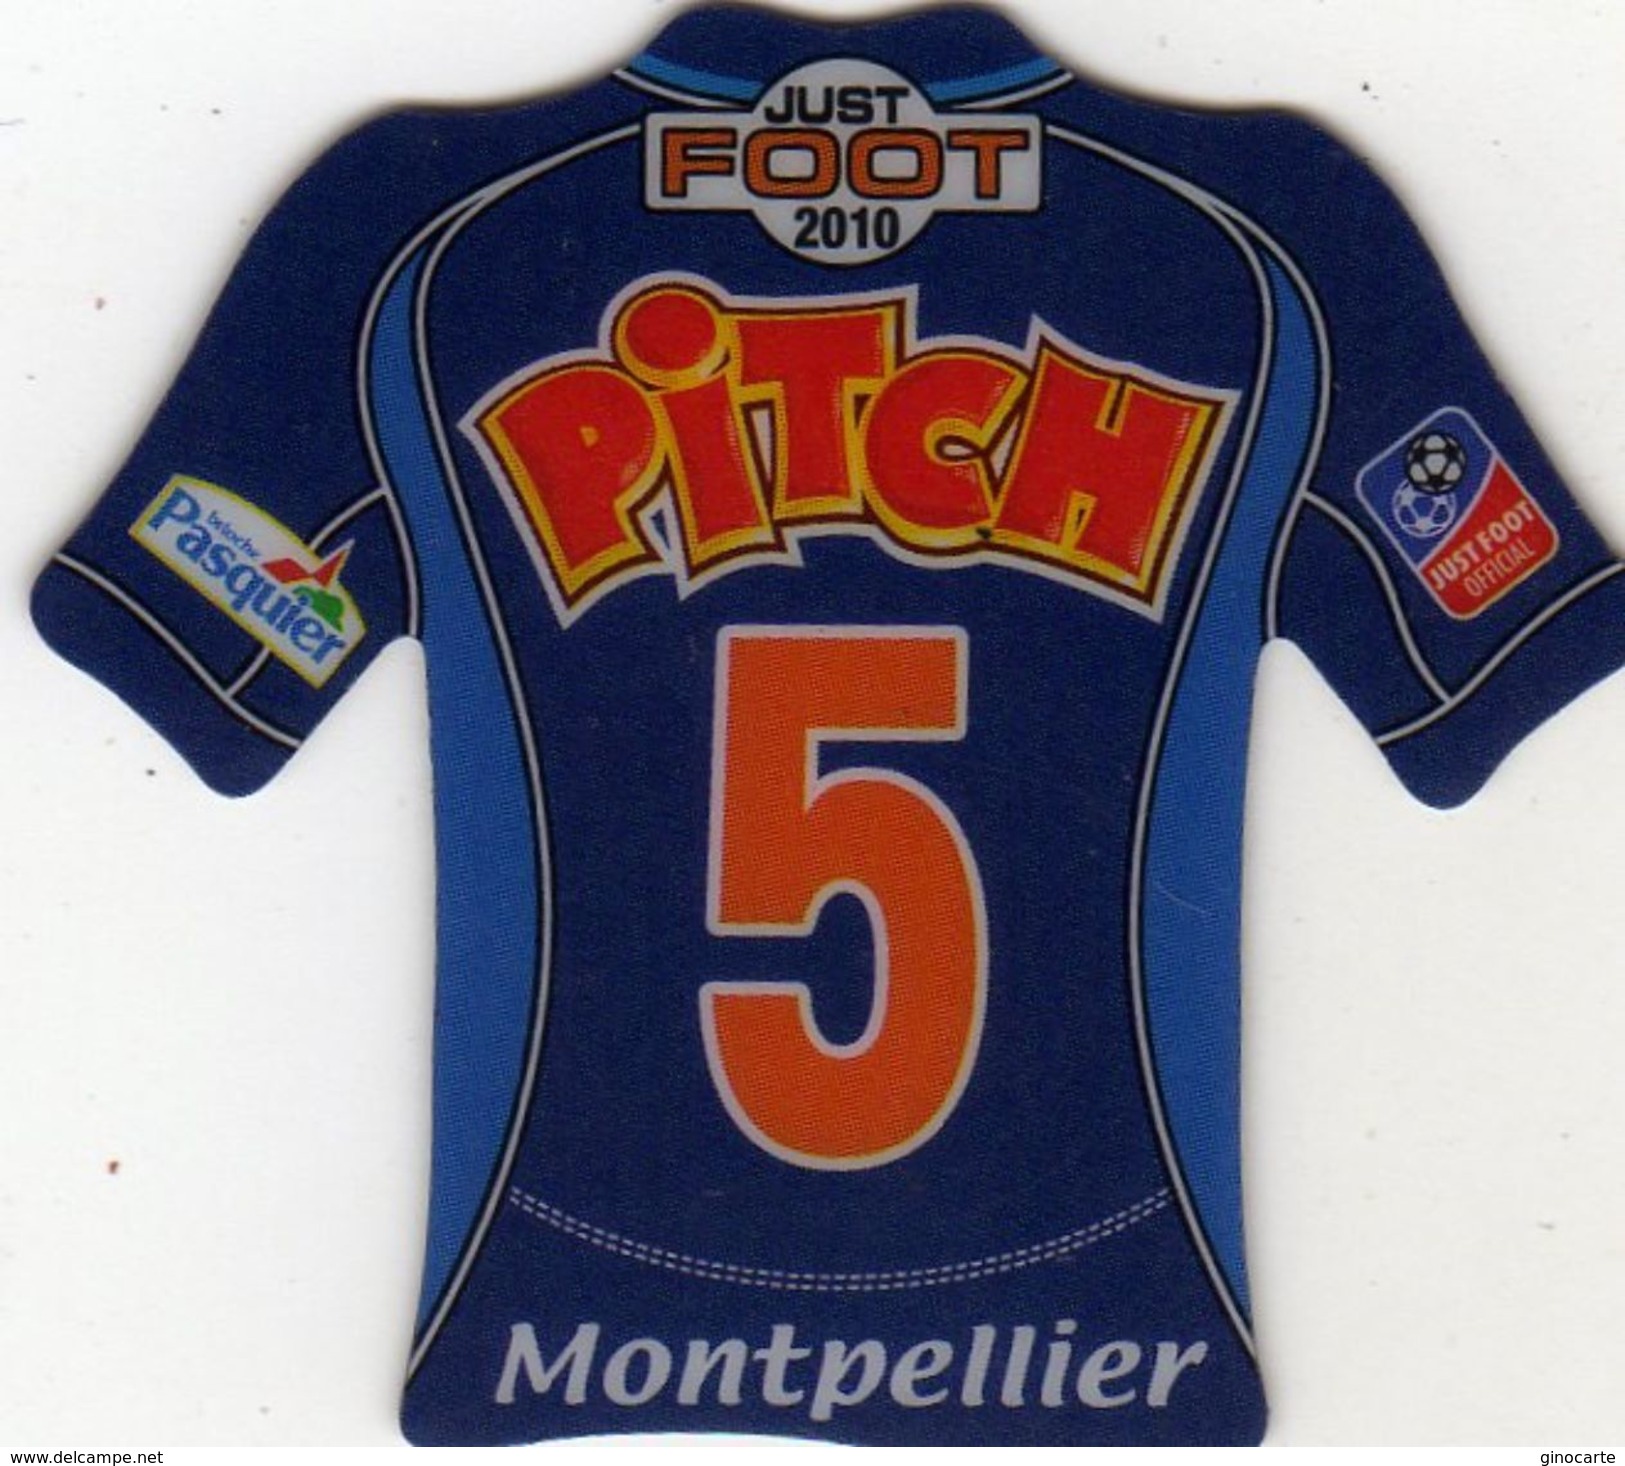 Magnet Magnets Maillot De Football Pitch Montpellier 2010 - Sports